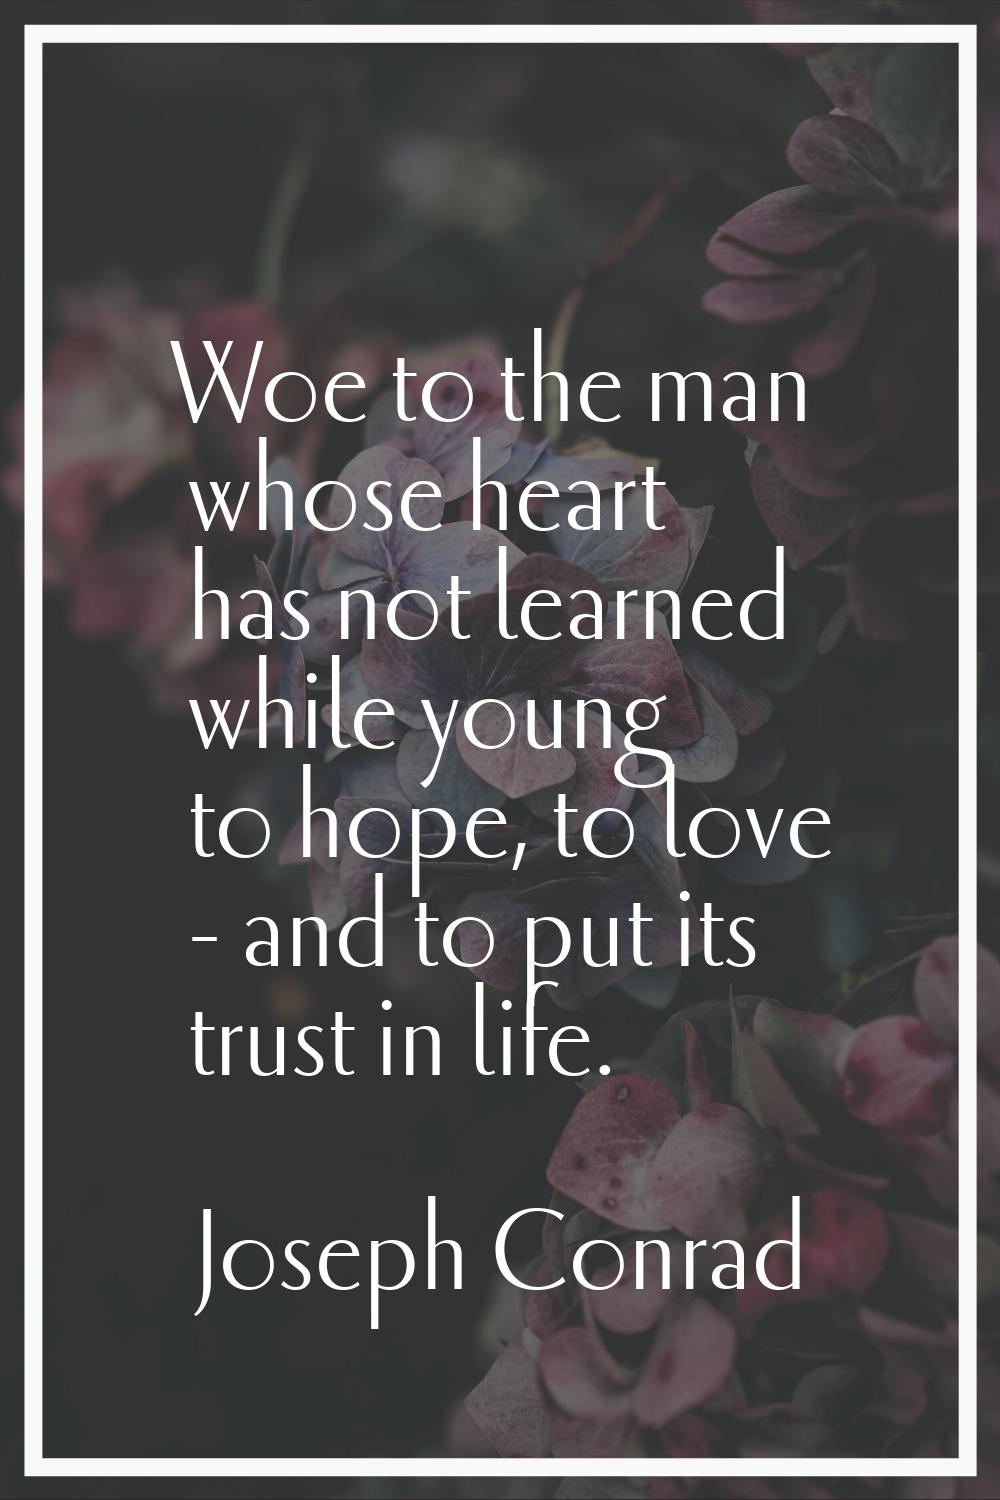 Woe to the man whose heart has not learned while young to hope, to love - and to put its trust in l